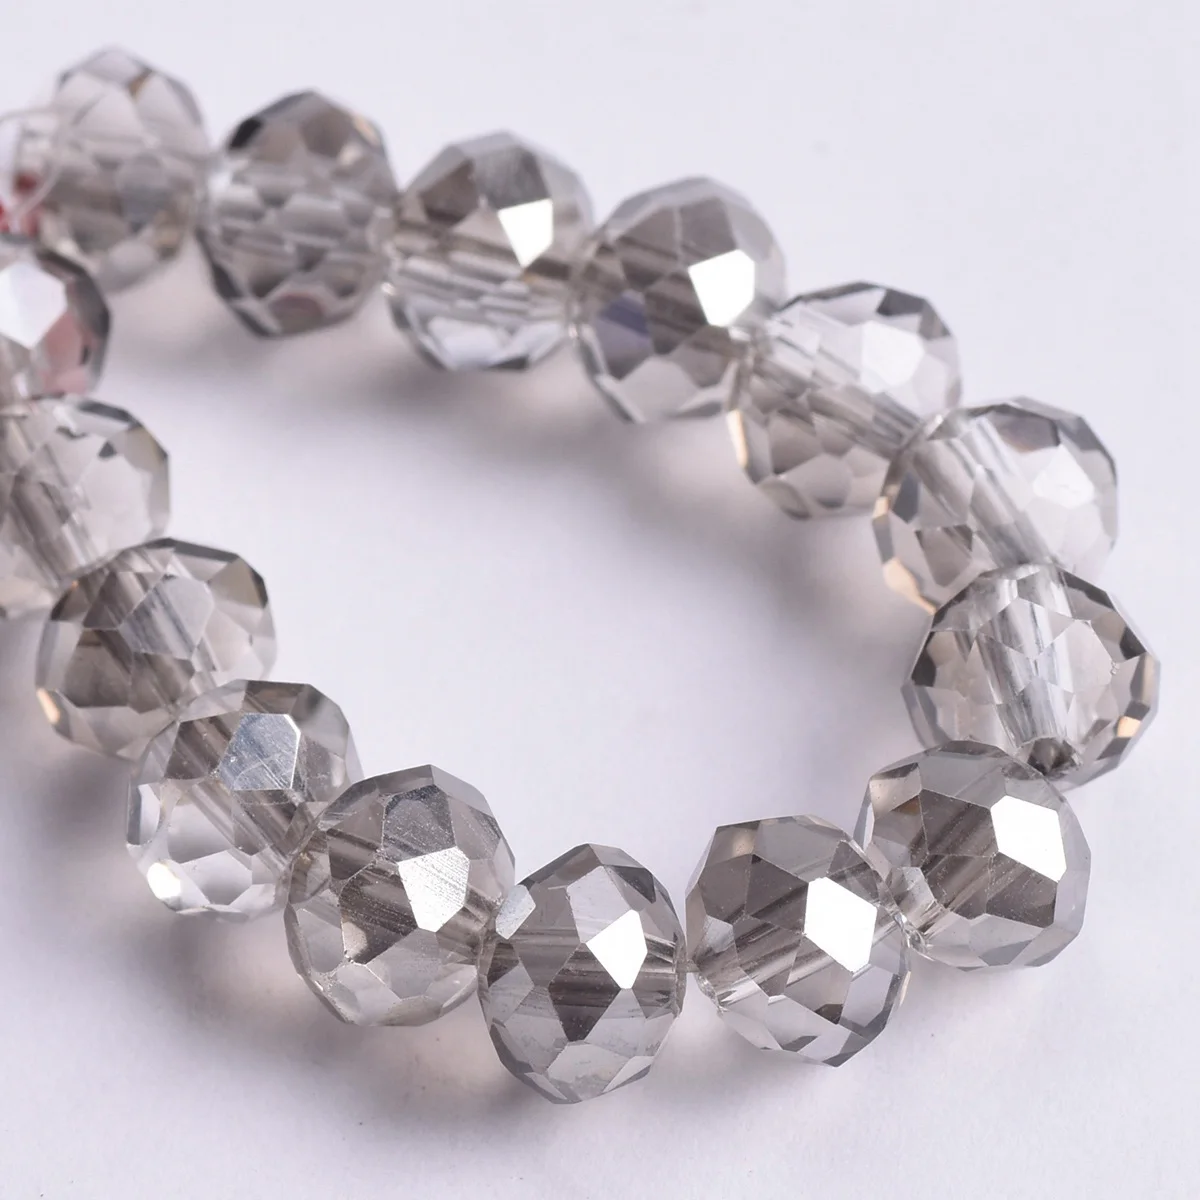 Top Quality Czech Crystal Faceted Rondelle Spacer Beads 3MM 4MM 6MM 8MM 10MM 